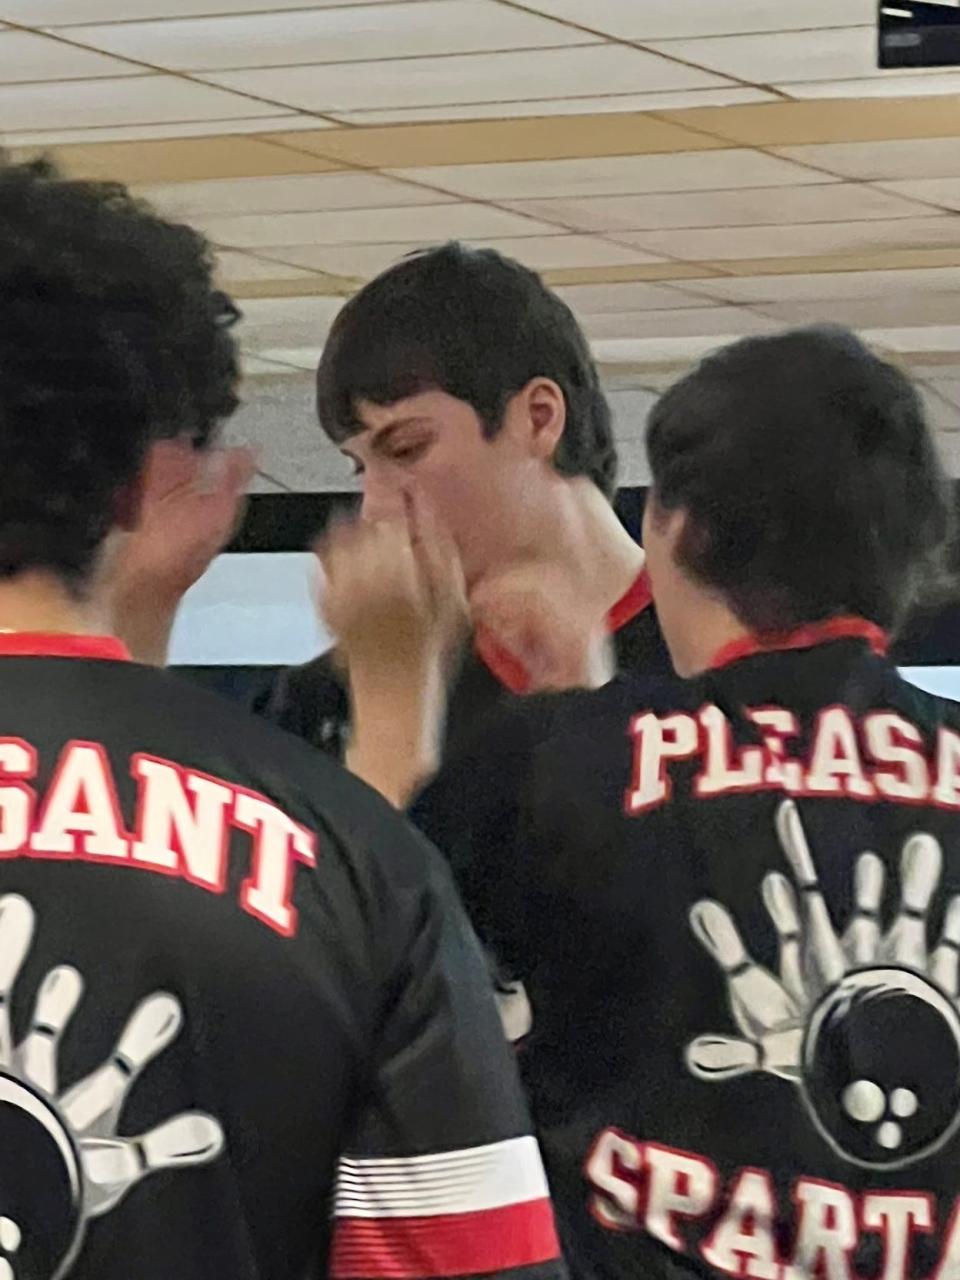 Pleasant's boys bowling team congratulates Johnathan Maran after a strike during the Mid Ohio Athletic Conference Bowling Tournament Saturday at Victory Lanes in Galion.